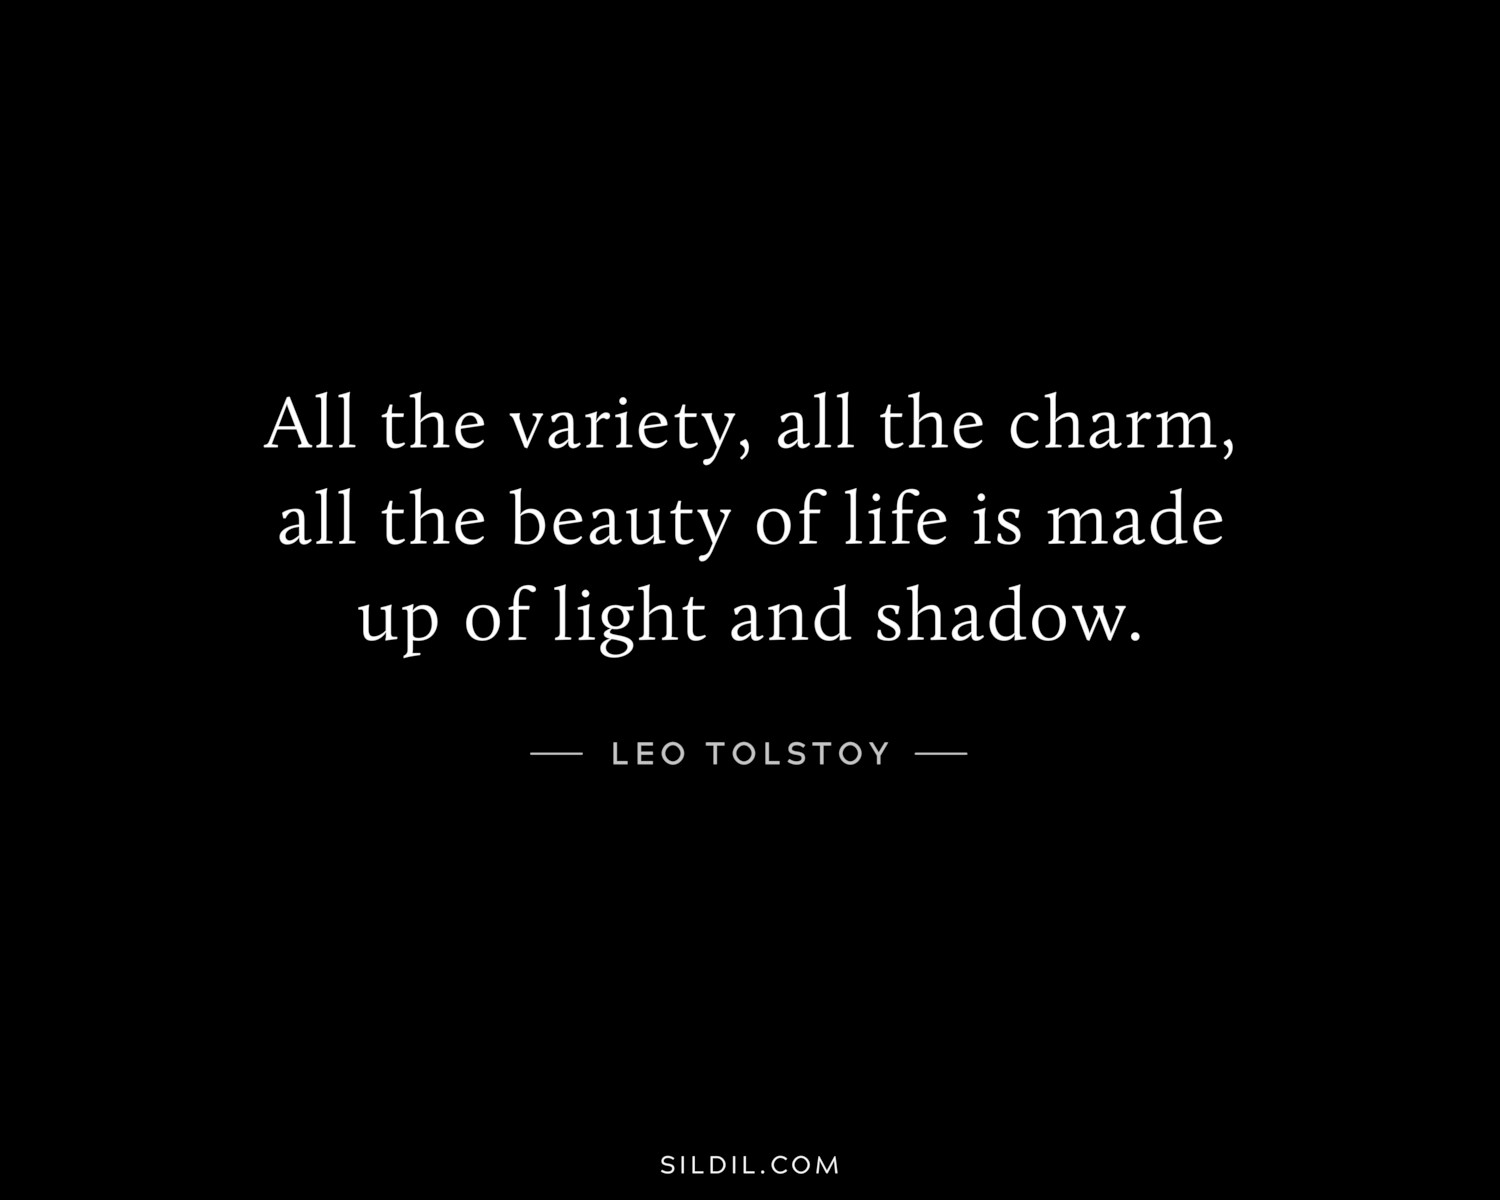 All the variety, all the charm, all the beauty of life is made up of light and shadow.